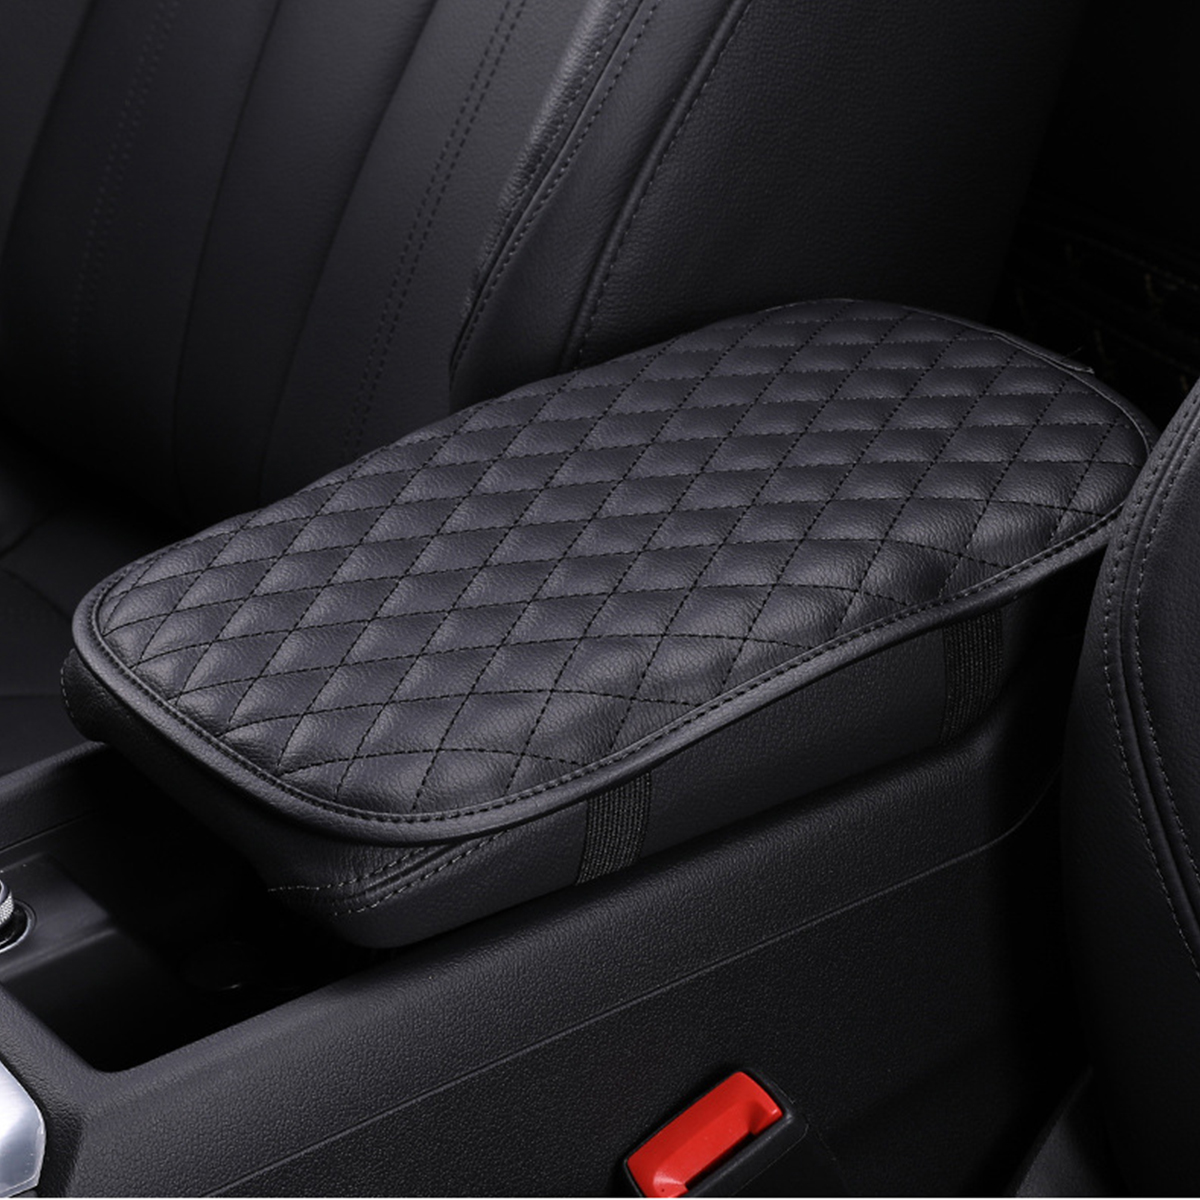 Car Armrest Cover Universal Car Armrest Pad Waterproof Car Center Console Cover 11.8 x 7.87 Inch Car Armrest Seat Box Cover Protector Car Decoration Accessories for Vehicle SUV Truck Car (Black) - image 4 of 8